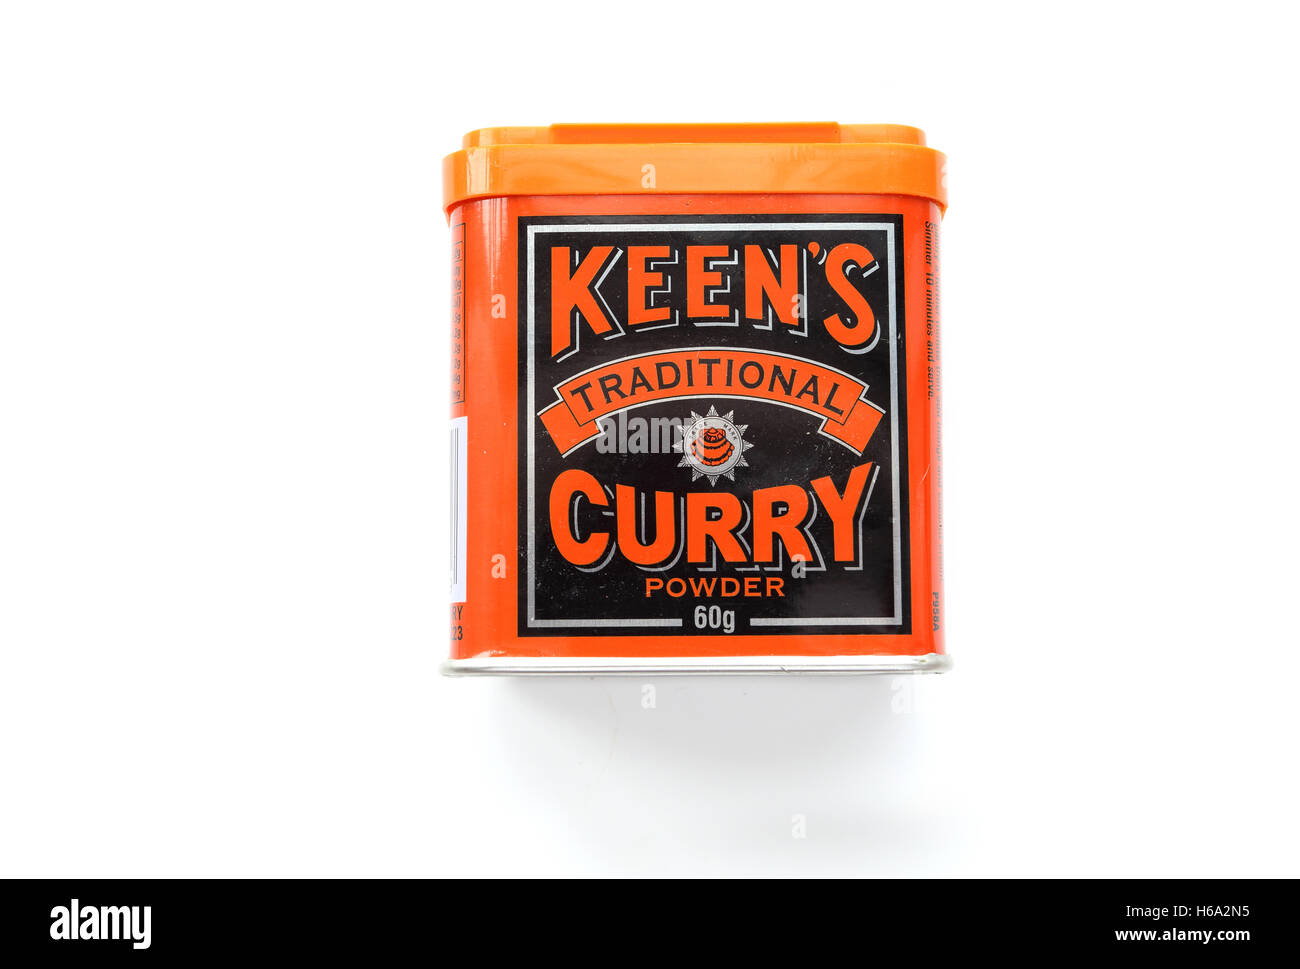 Keen's traditional curry powder isolated on white background Stock Photo